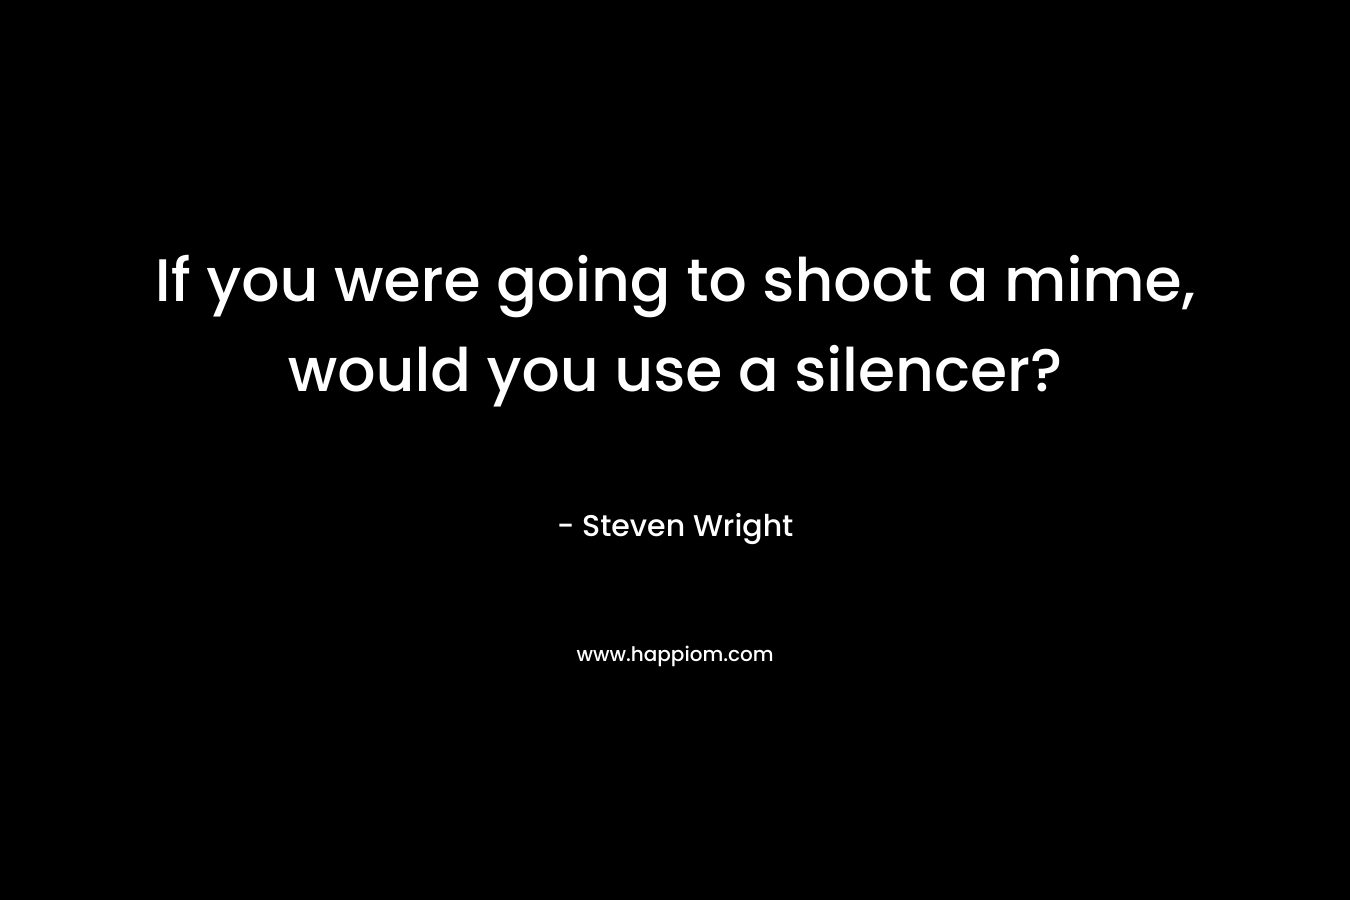 If you were going to shoot a mime, would you use a silencer? – Steven Wright